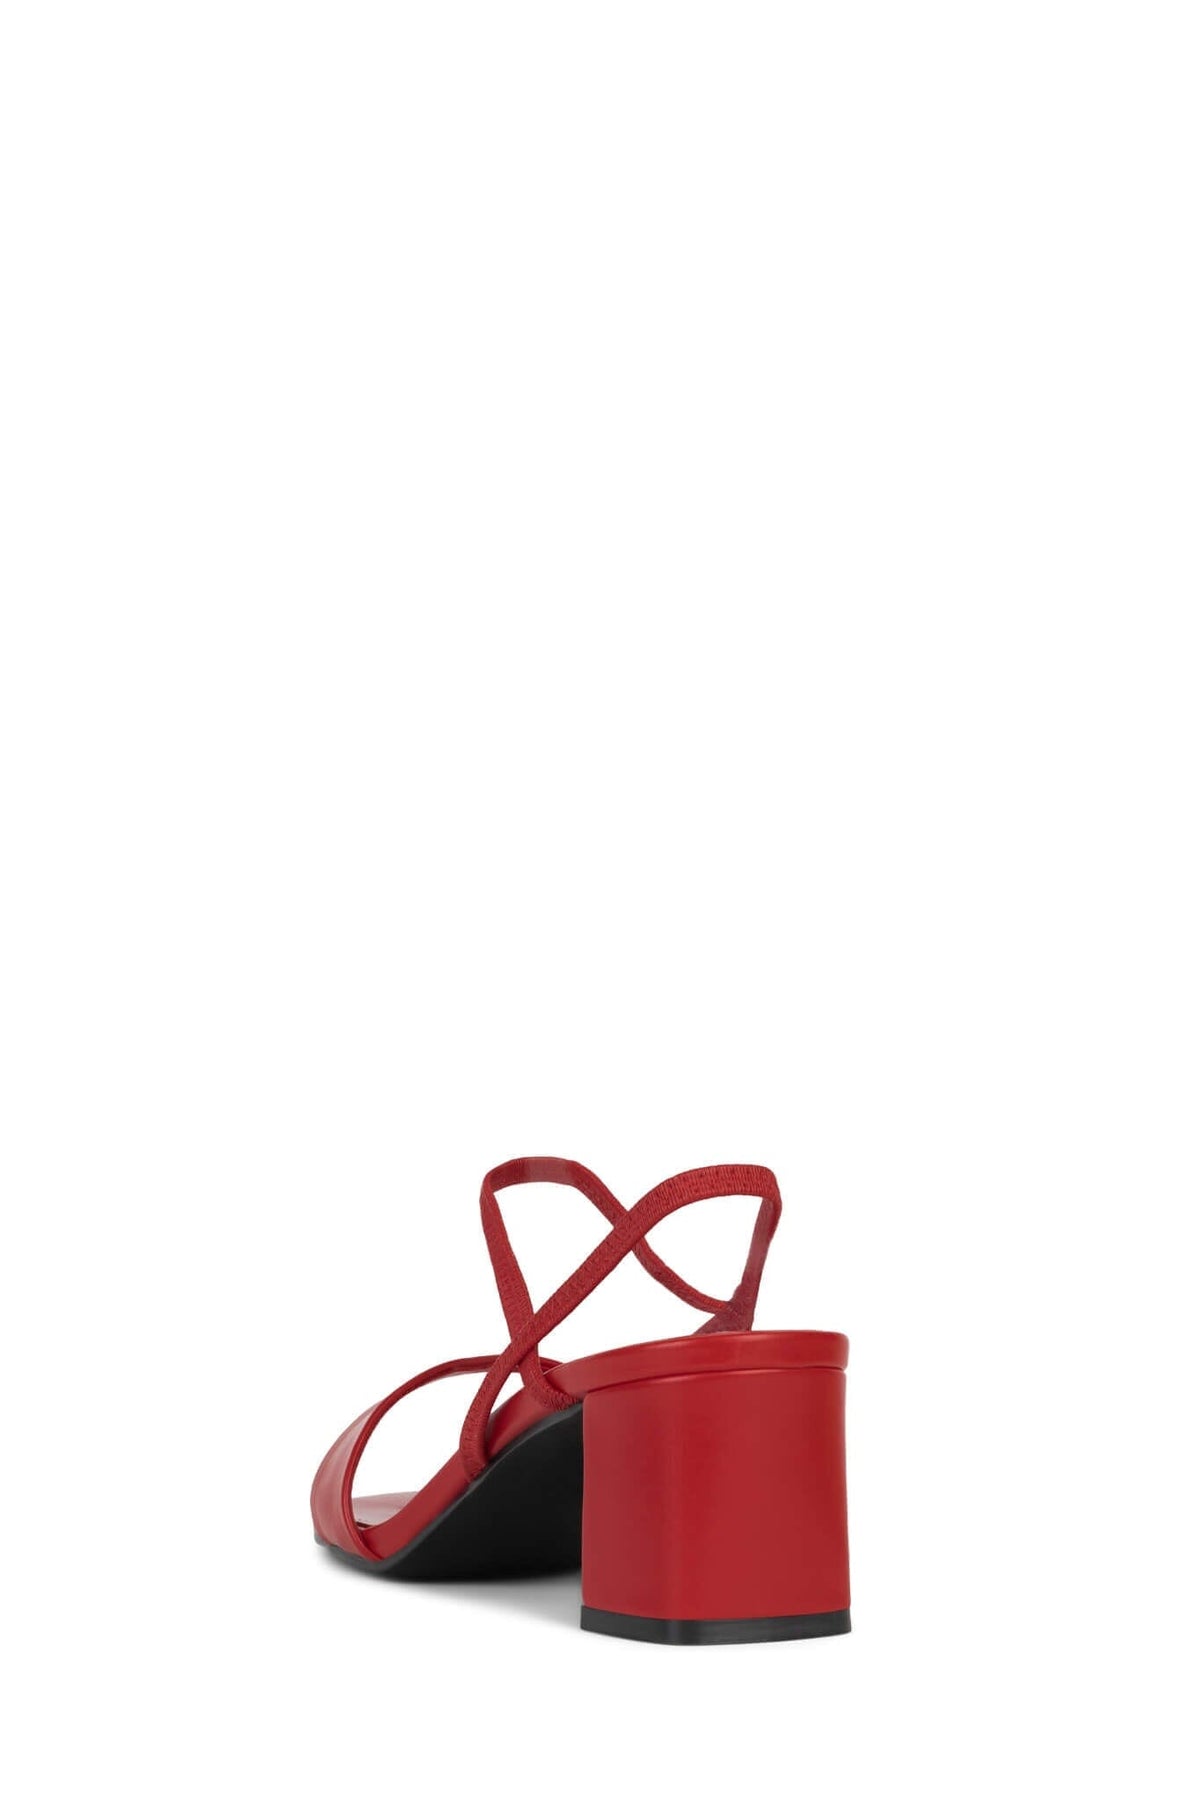 ADAPT Jeffrey Campbell Heeled Sandals Red